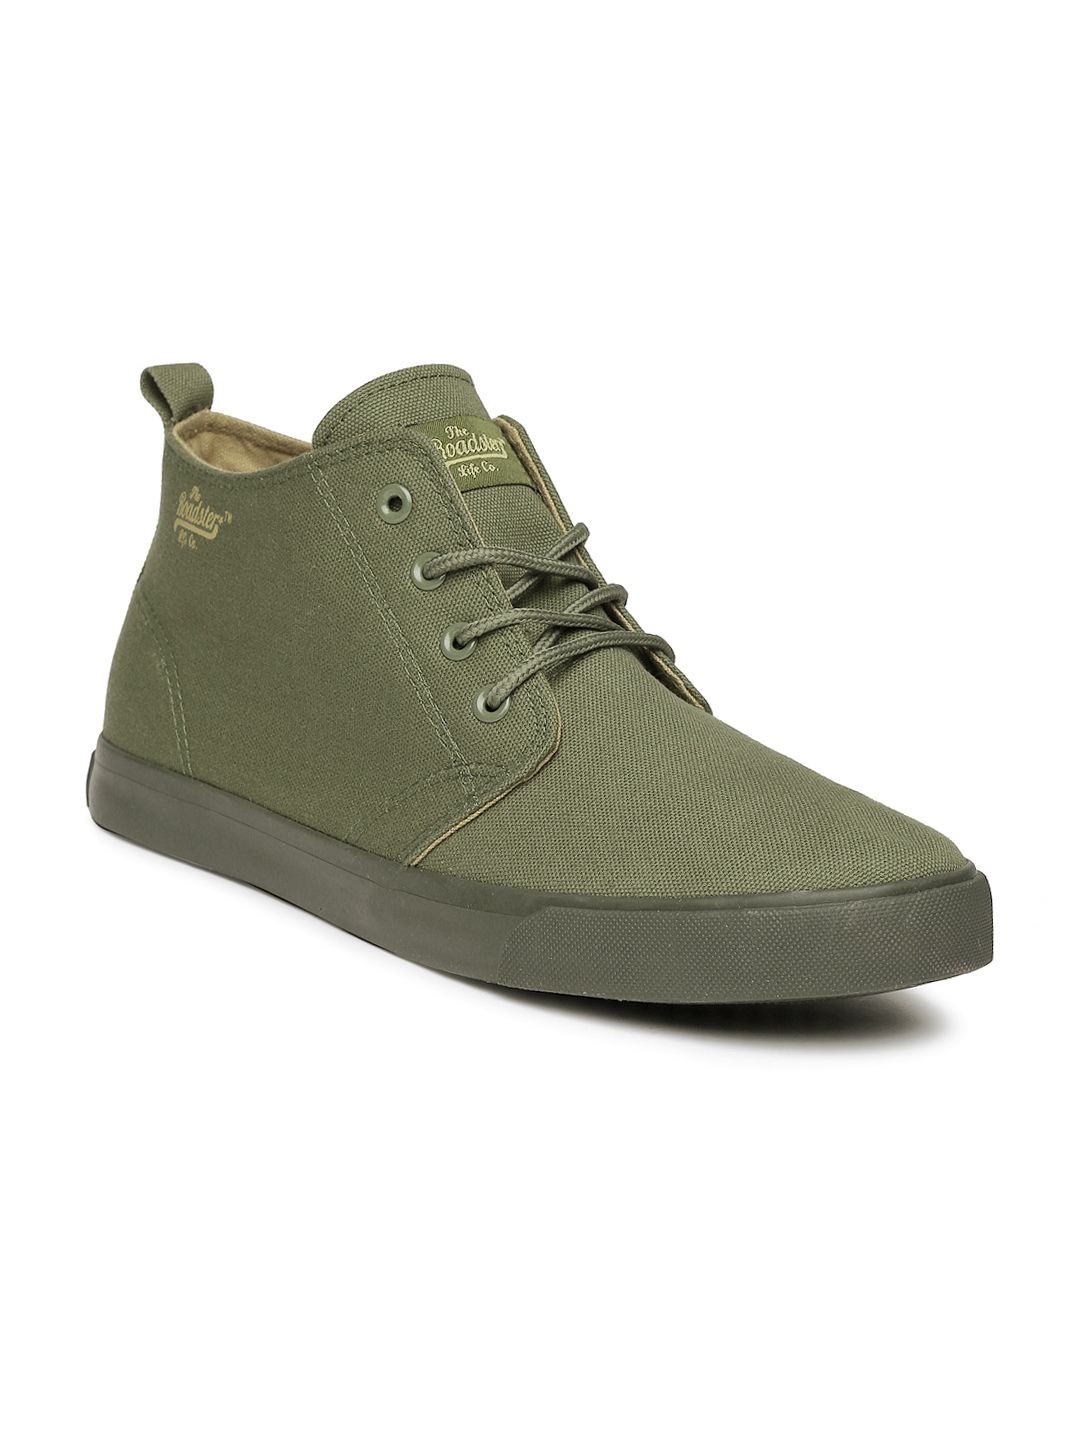 Myntra Roadster Men Olive Green Casual Shoes 736471 Buy